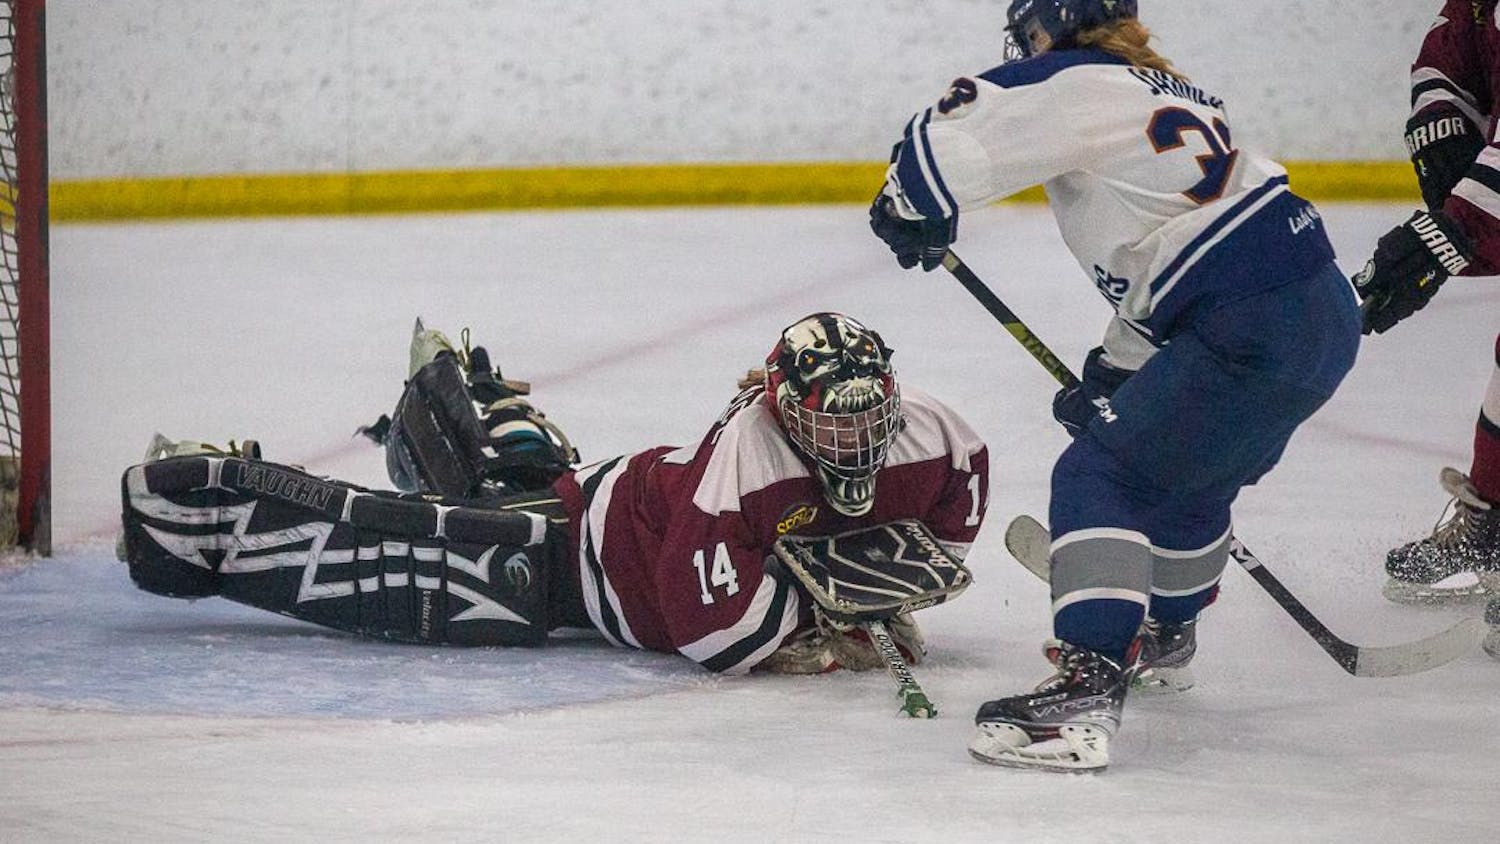 Senior goalie Kelly Ahern blocks a puck during the matchup against the Lady Warriors on Oct. 1, 2023. The Gamecocks joined the College Hockey South League, which also consists of Auburn University, the University of Georgia, the University of Tampa and the University of Alabama.